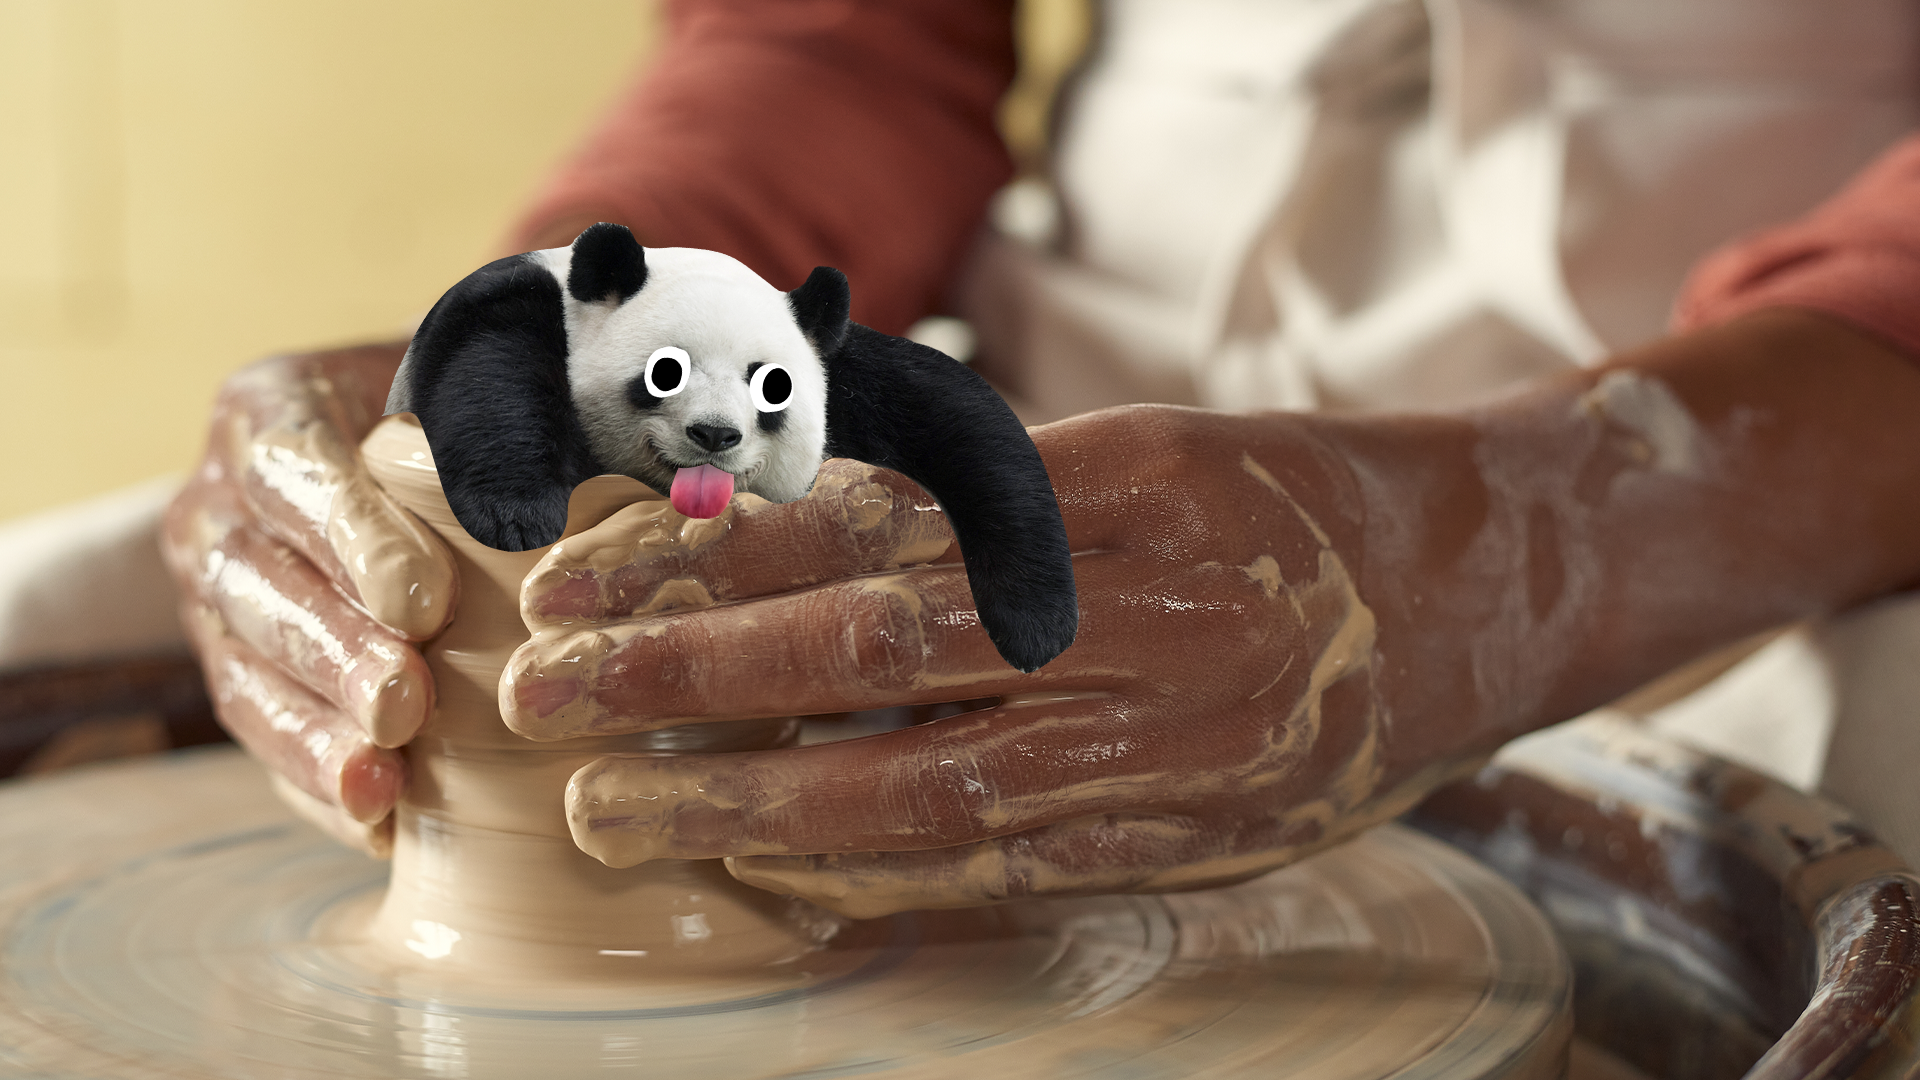 Someone doing pottery with derpy panda